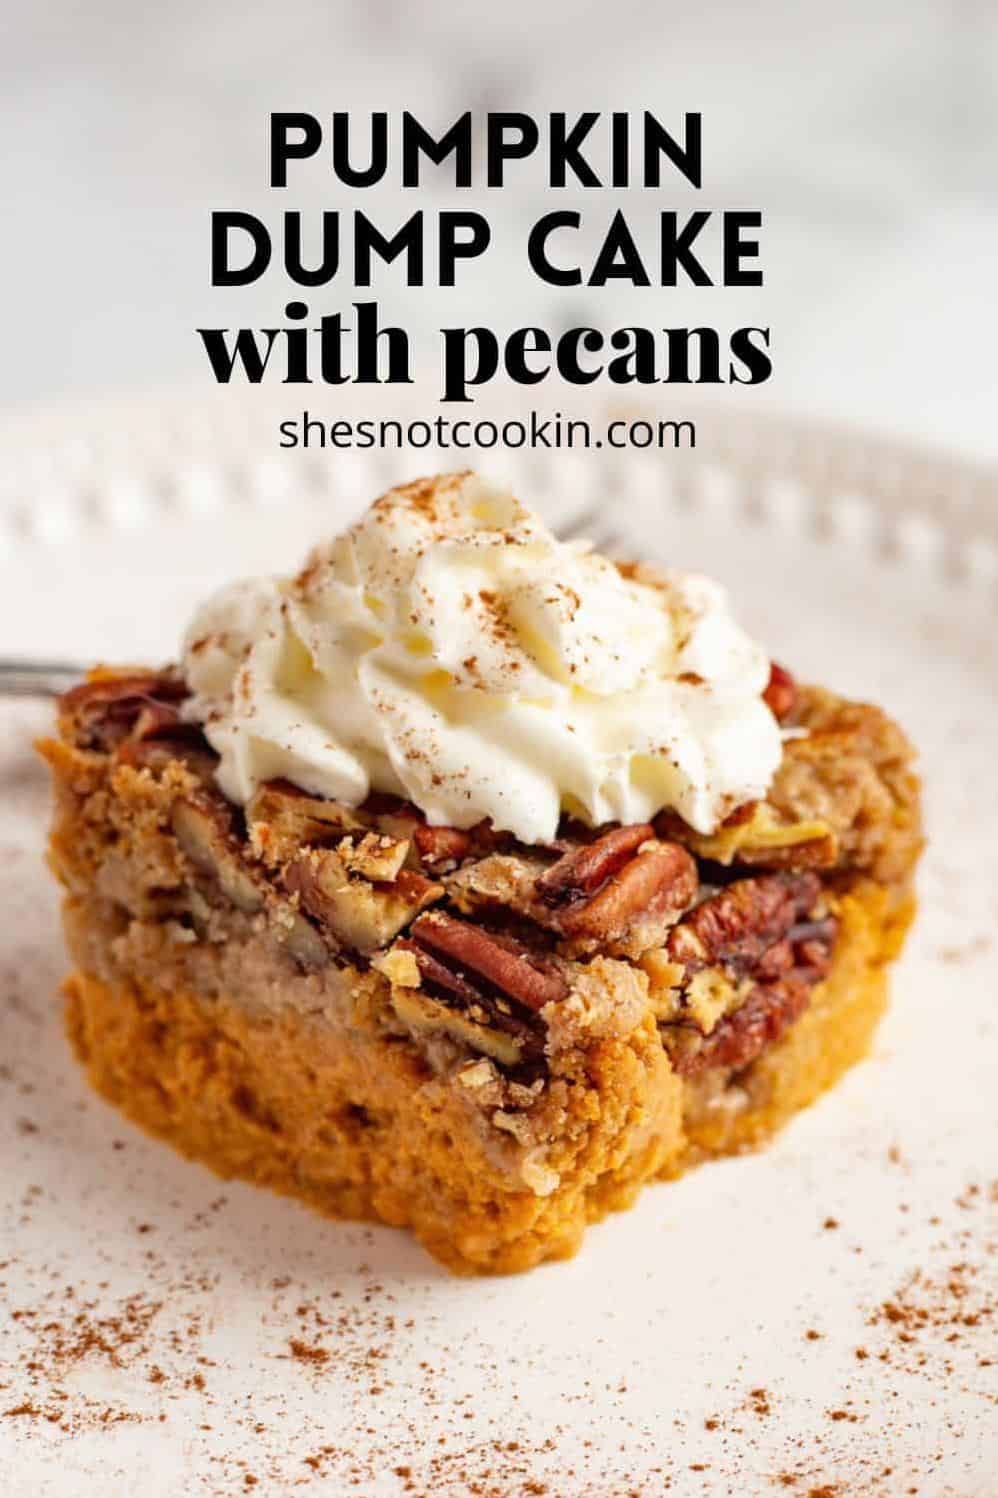  Just wait until you try how the flavors of pumpkin, pecans, and cinnamon blend together in a single bite!